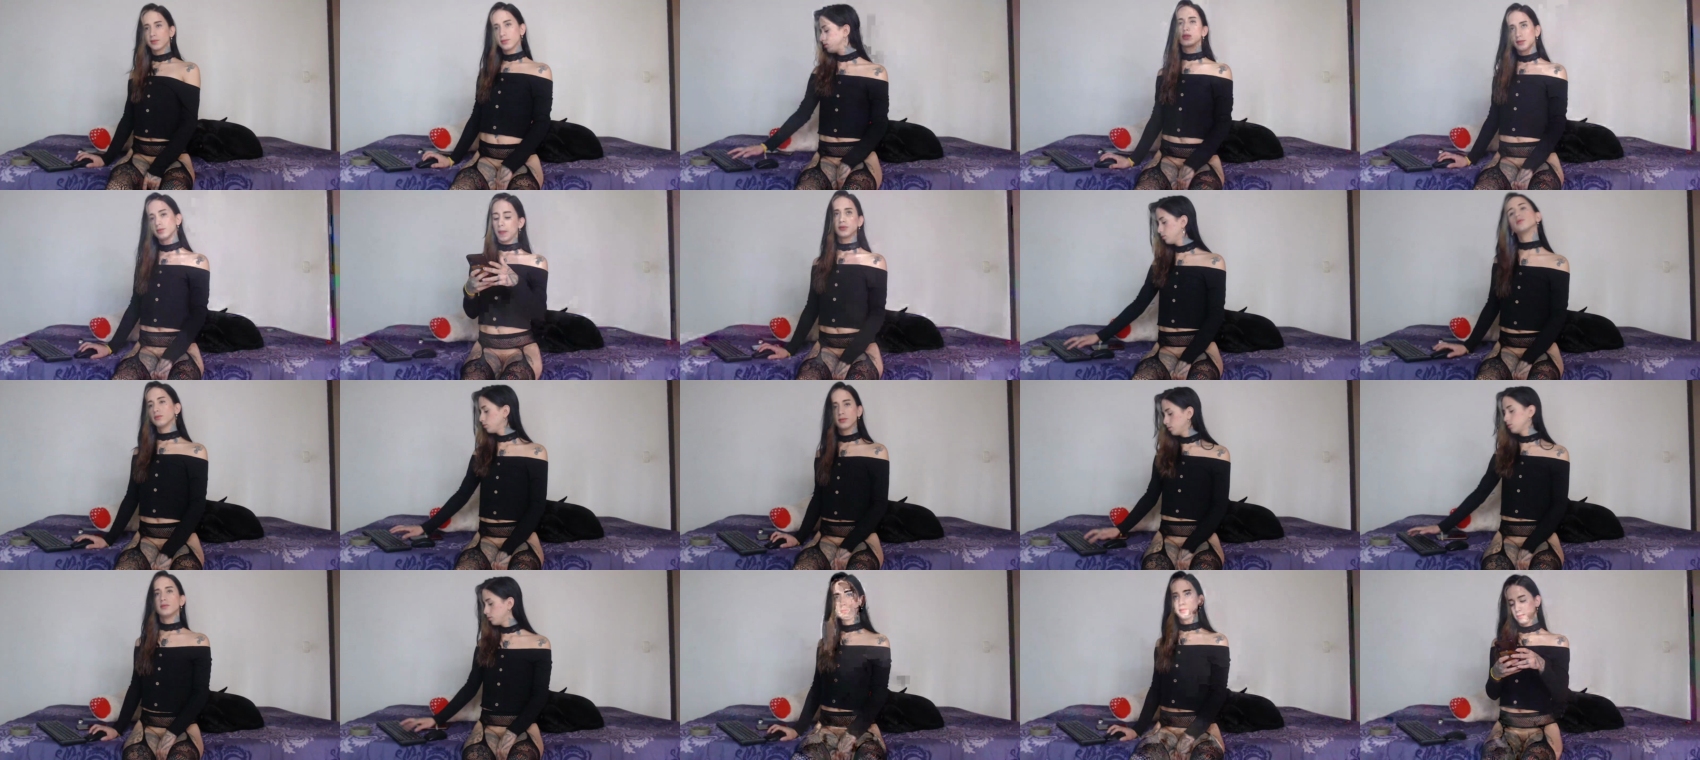 mely_roussex ts 22-03-2022  trans love